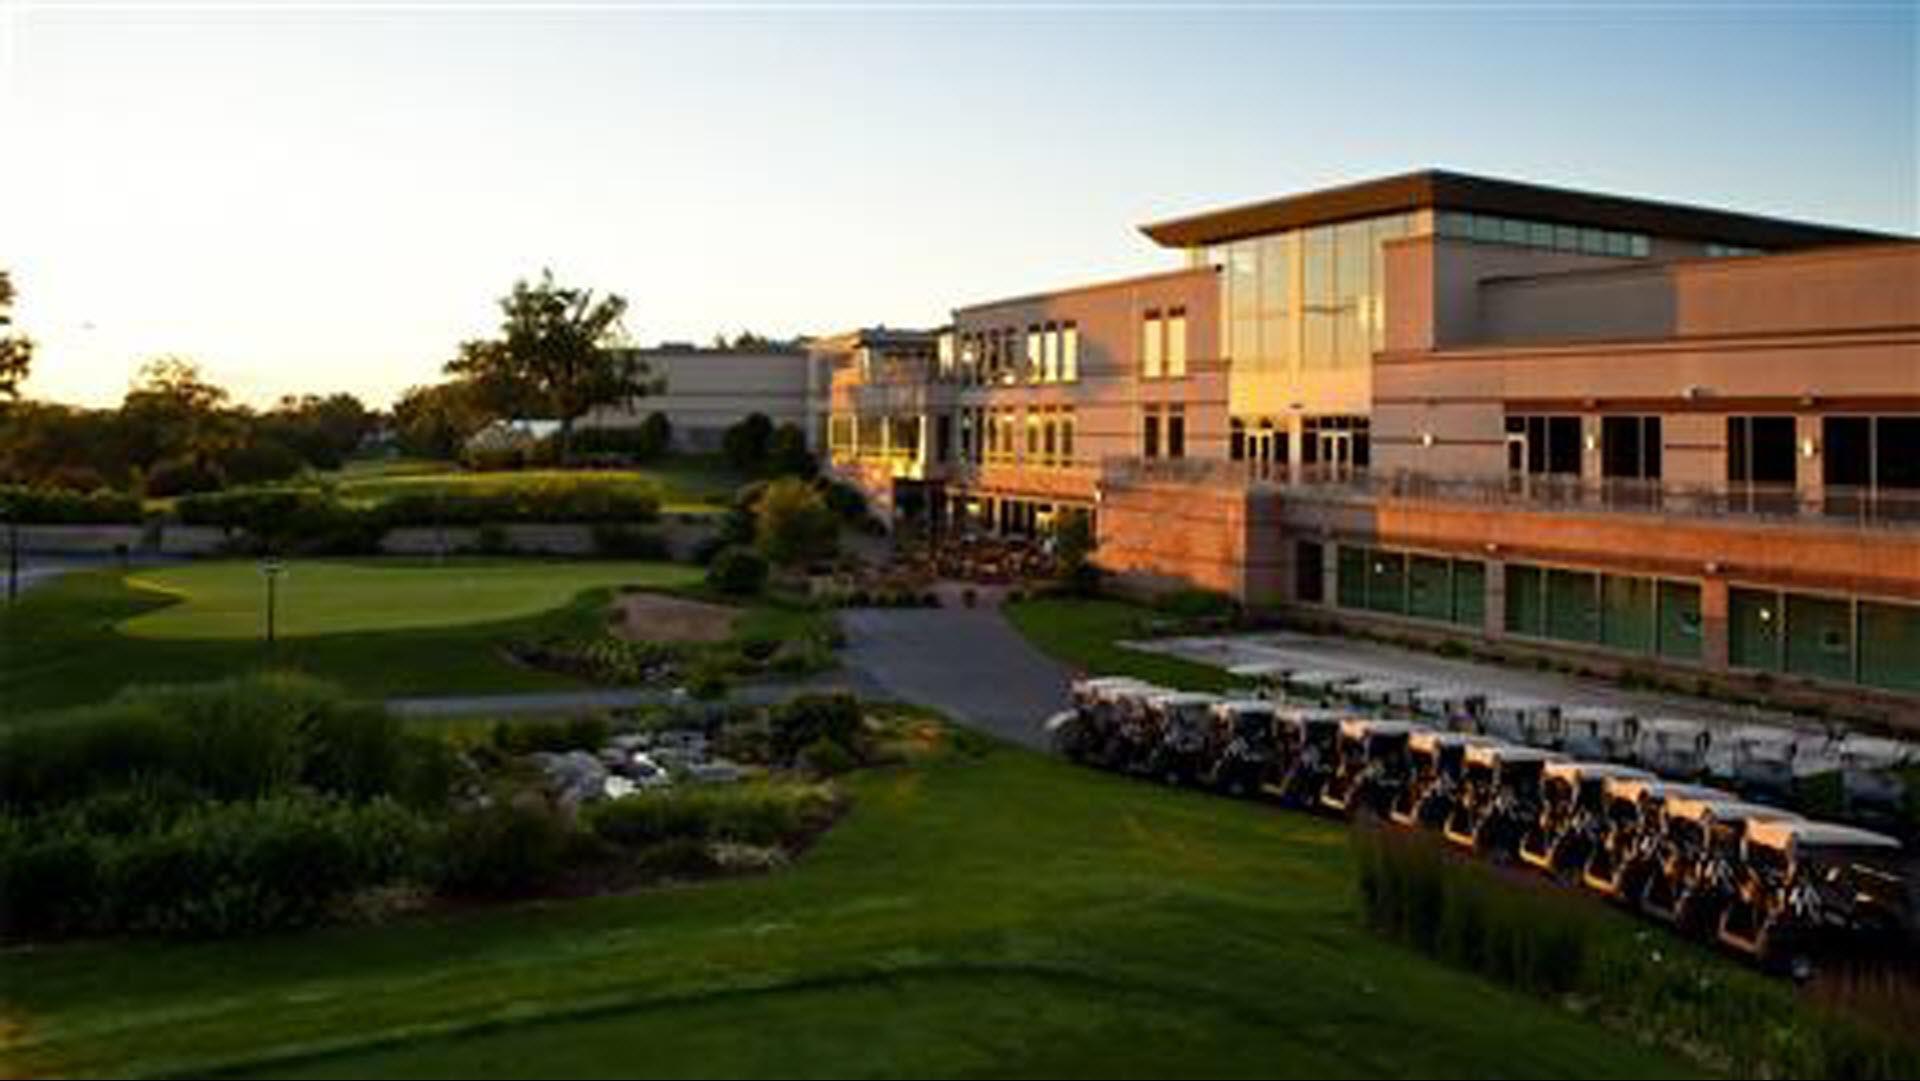 Eaglewood Resort & Spa in Itasca, IL